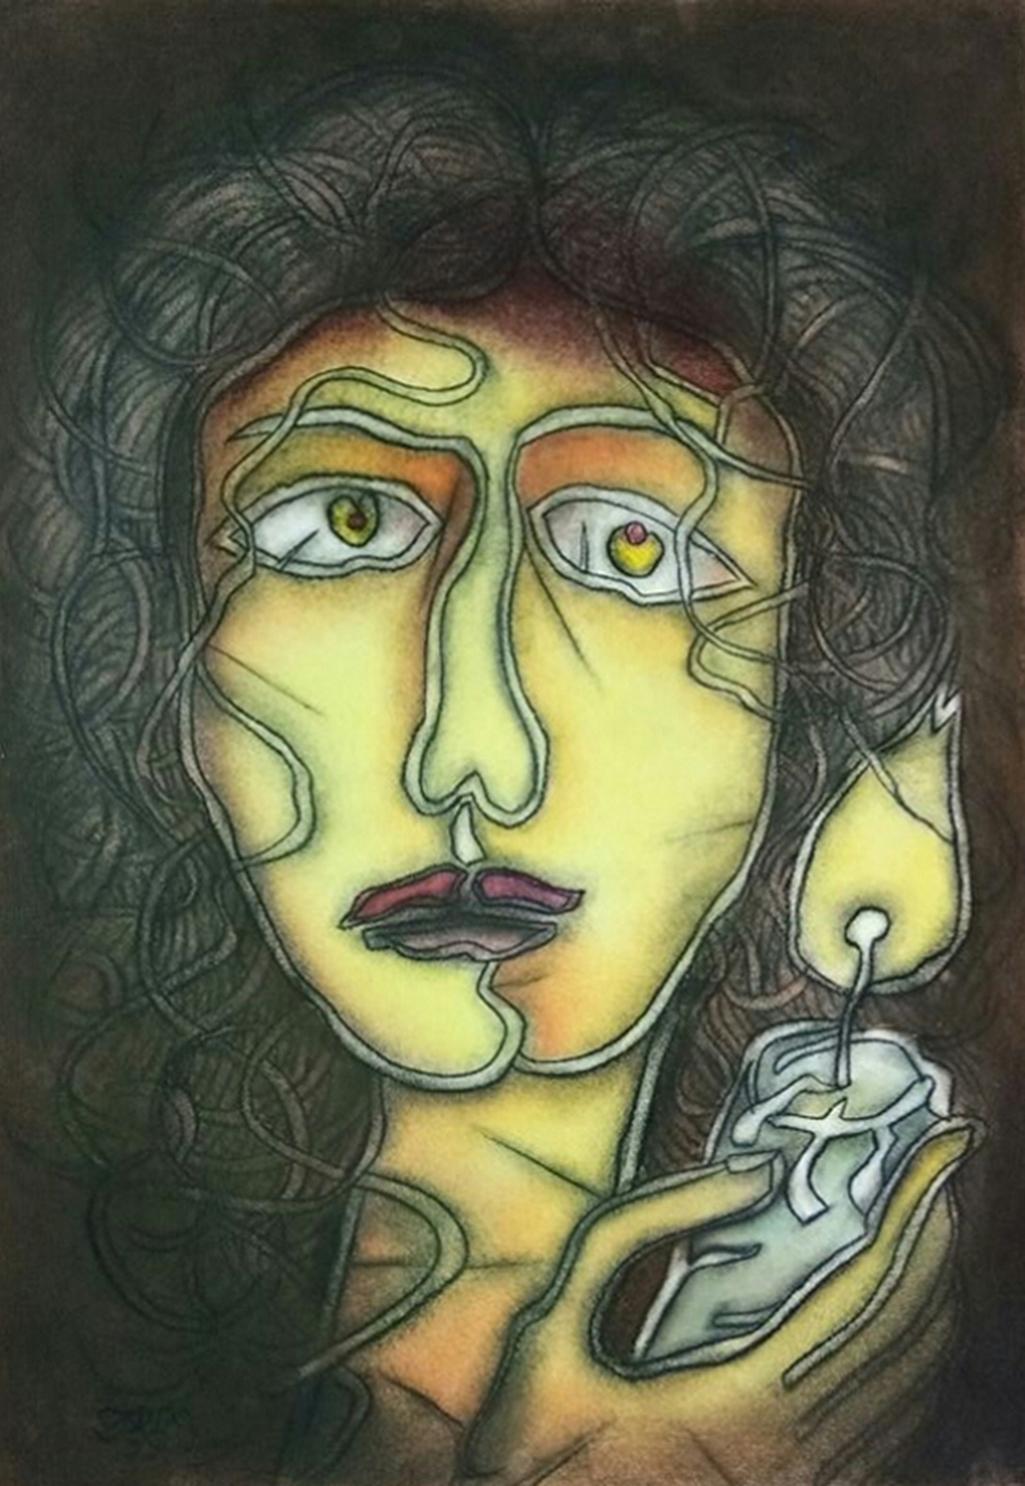 Lady with the Lamp, Dry Pastel on Paper by Prokash Karmakar “In Stock”